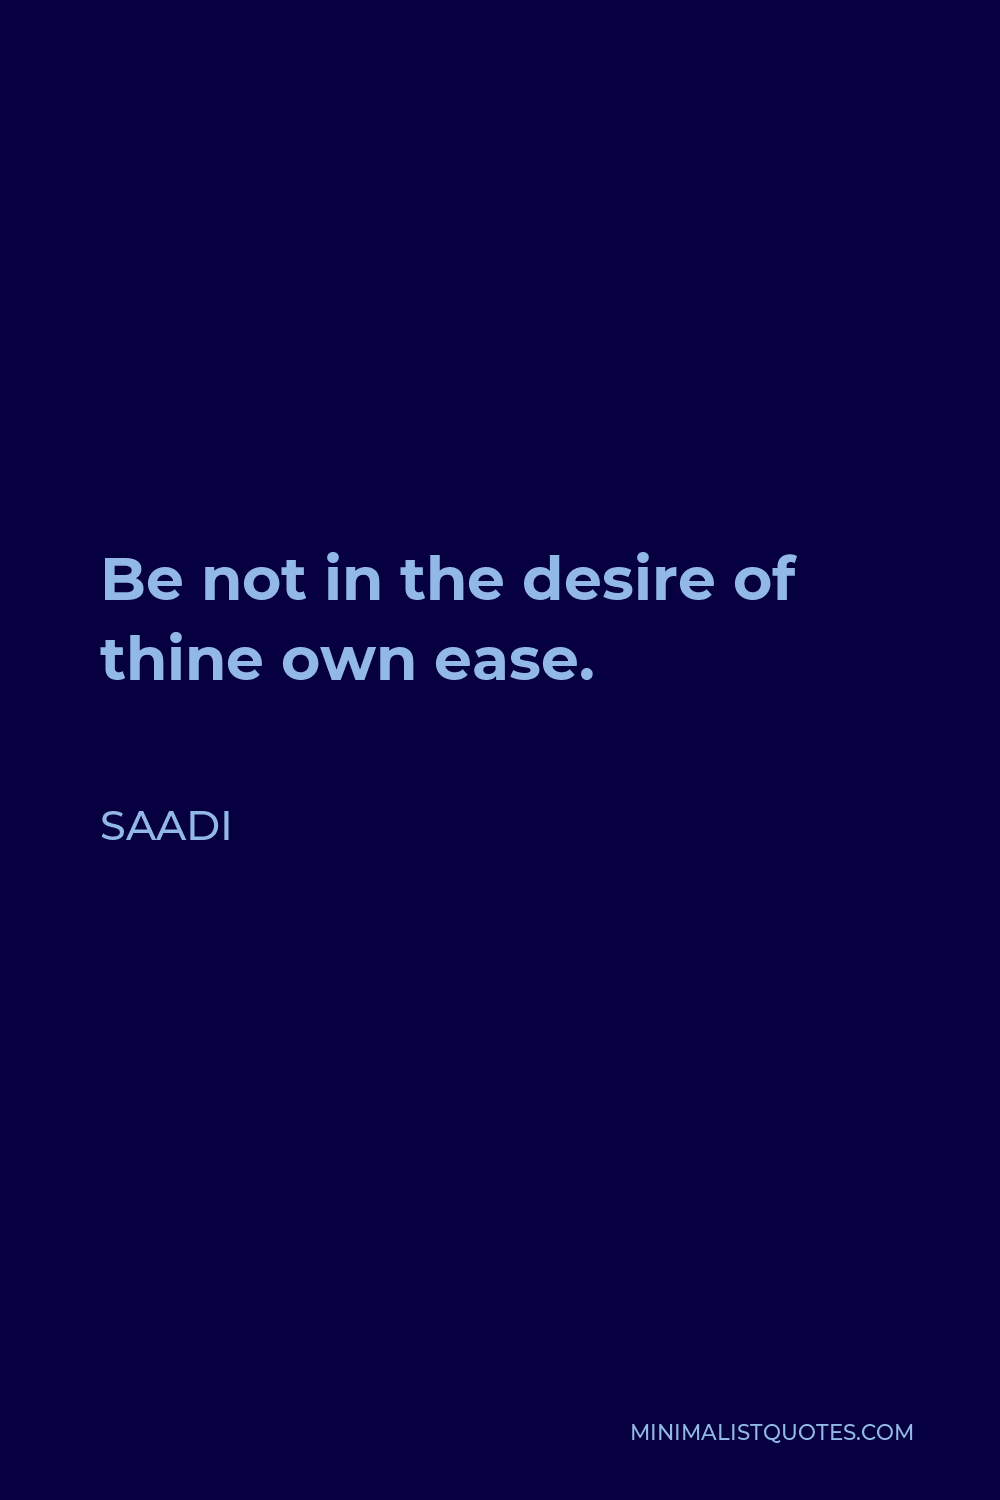 Saadi Quote - Be not in the desire of thine own ease.